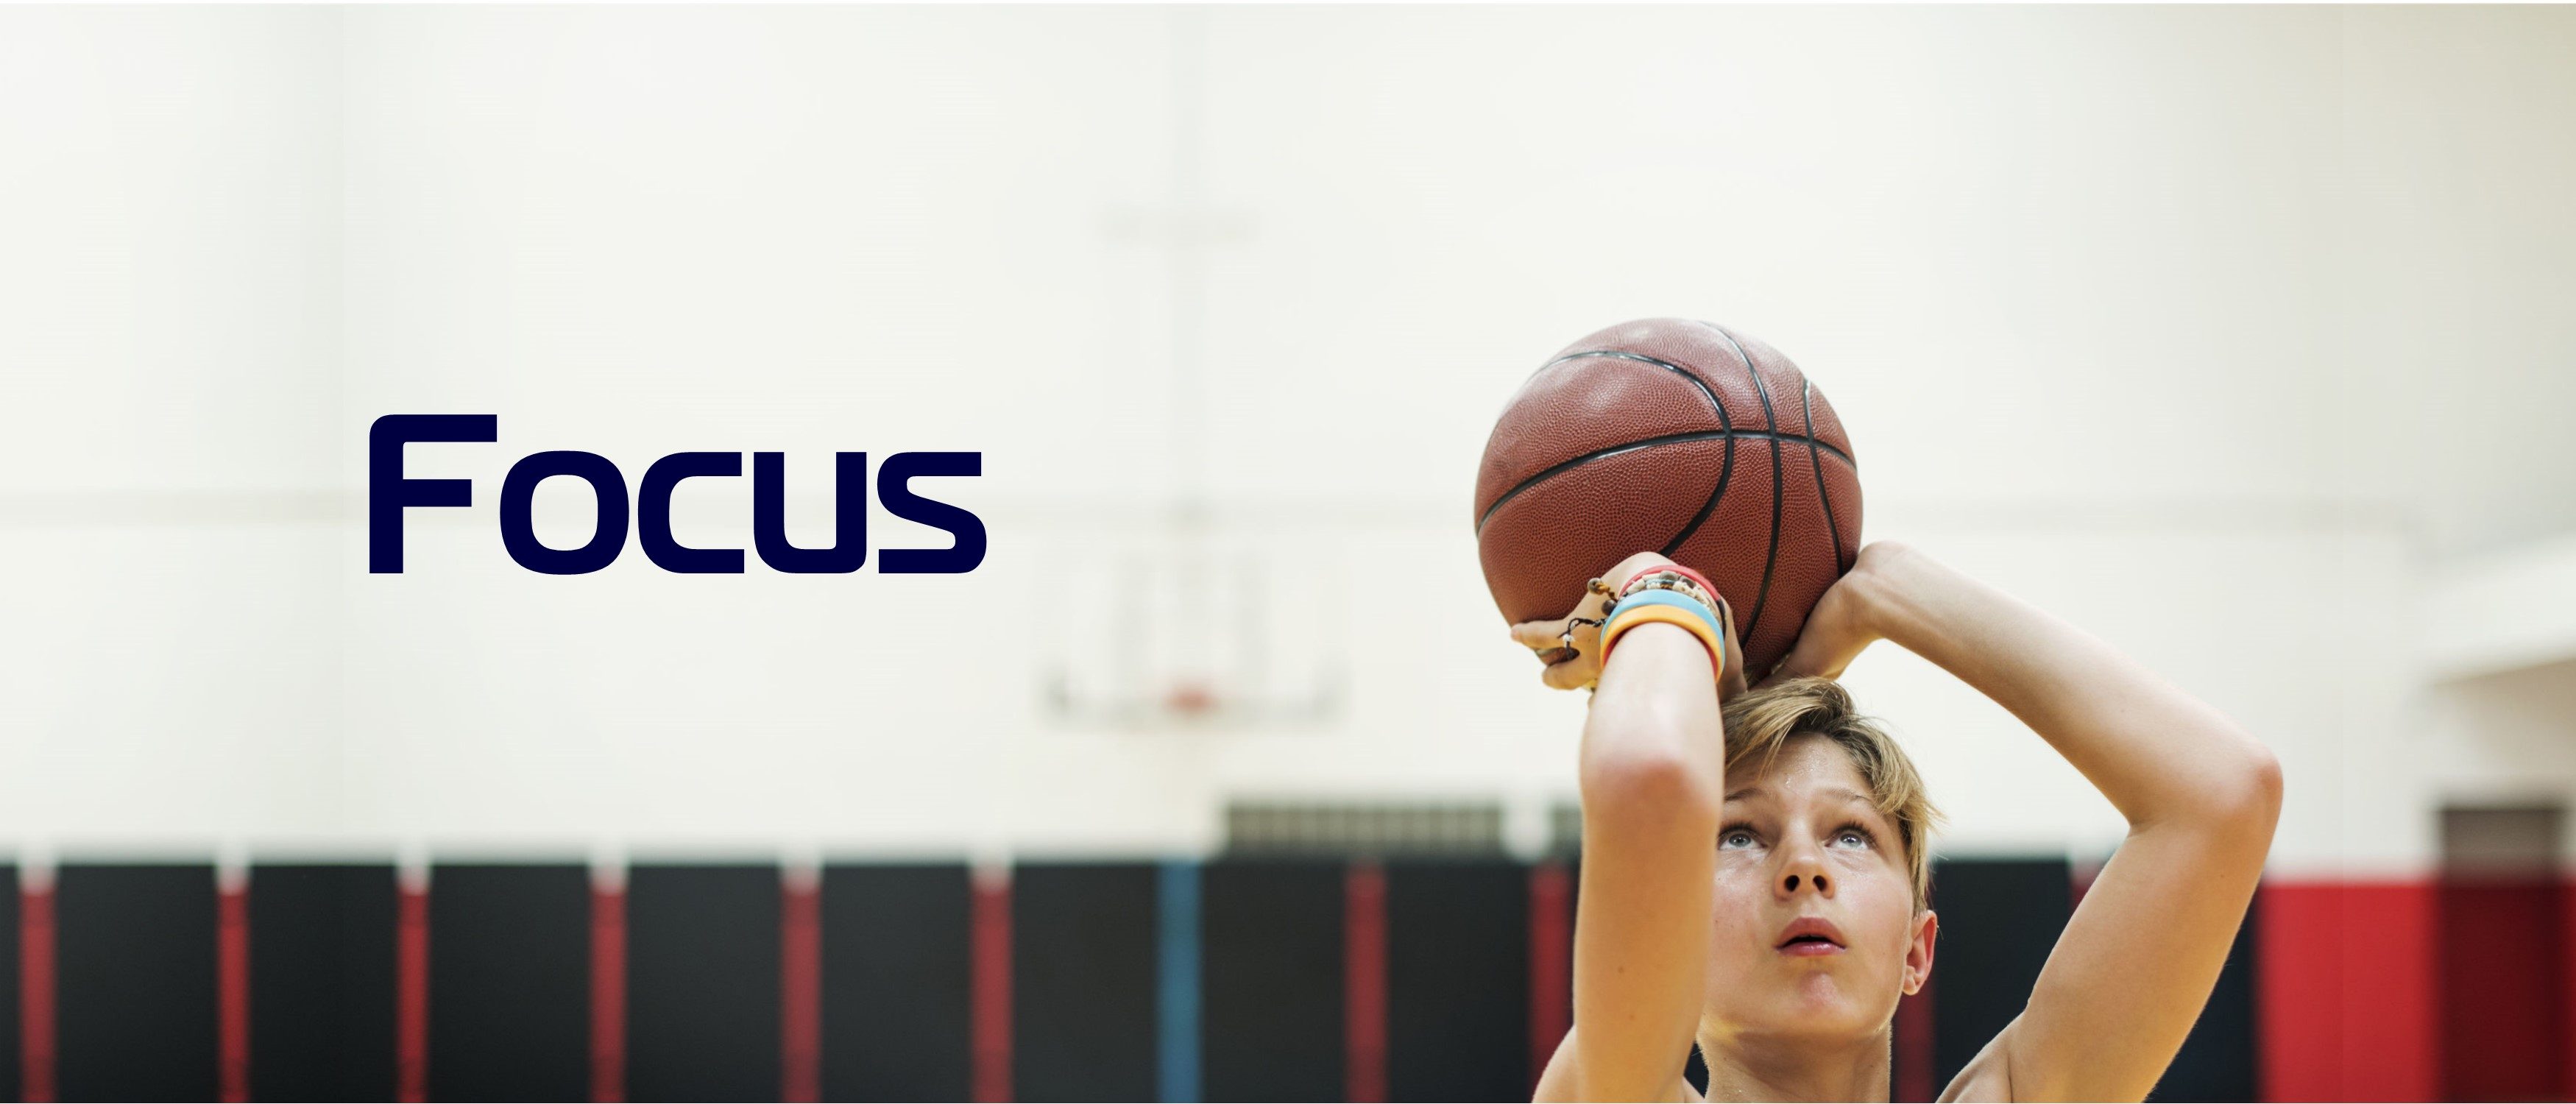 Young athlete holding ball preparing to make basketball shot with Focus text